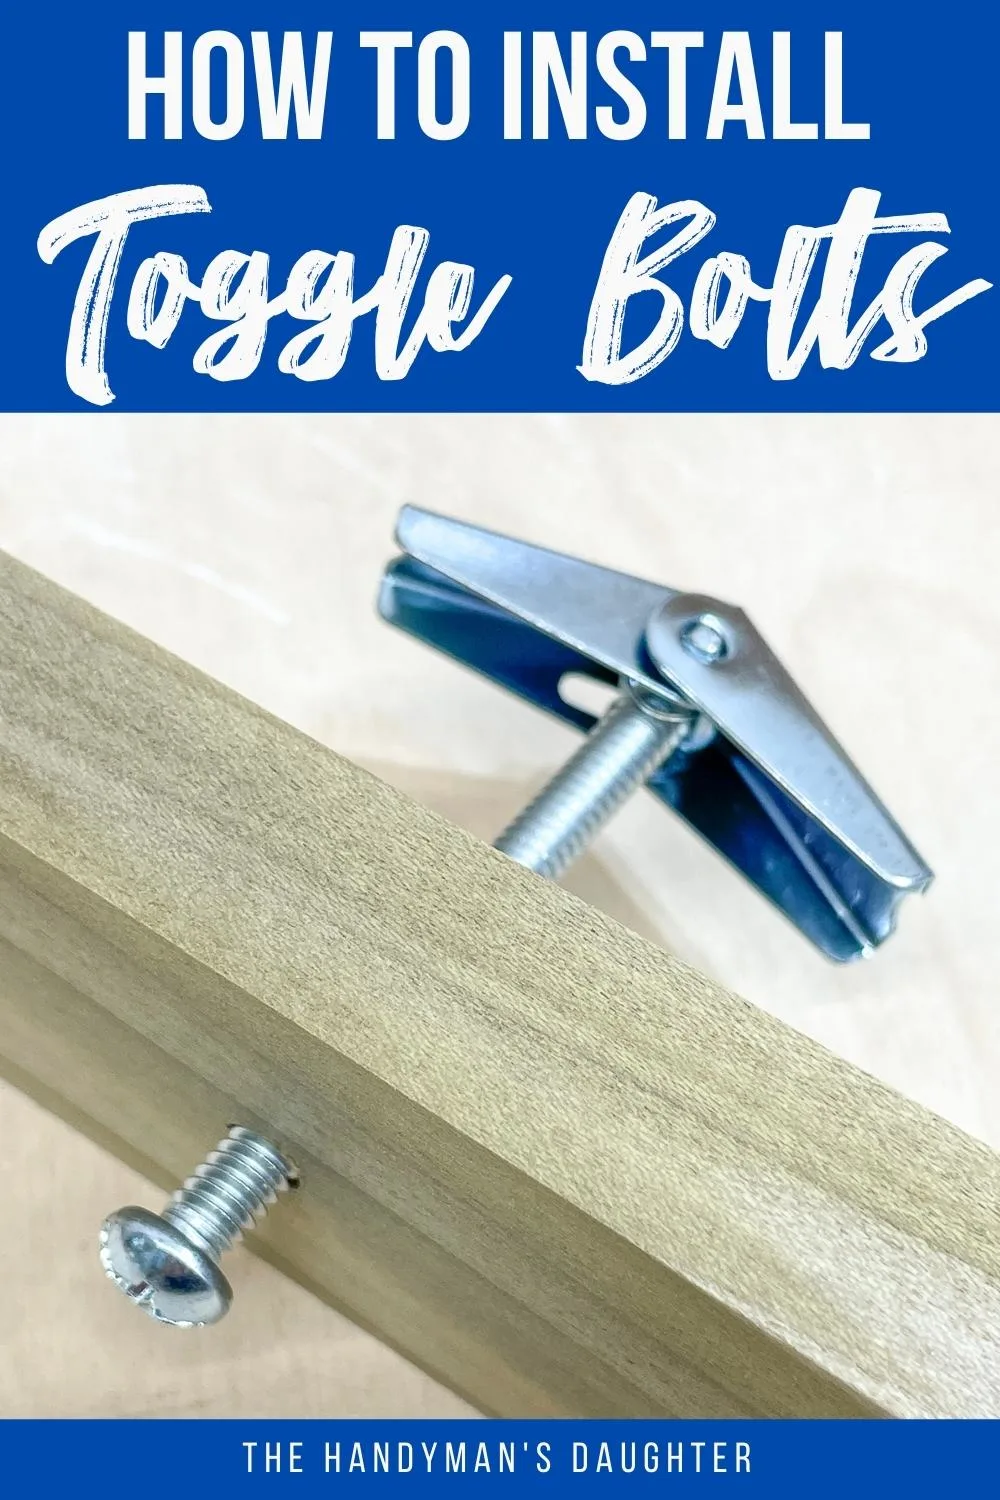 How to Use Toggle Bolts [Step-by-Step] - The Handyman's Daughter